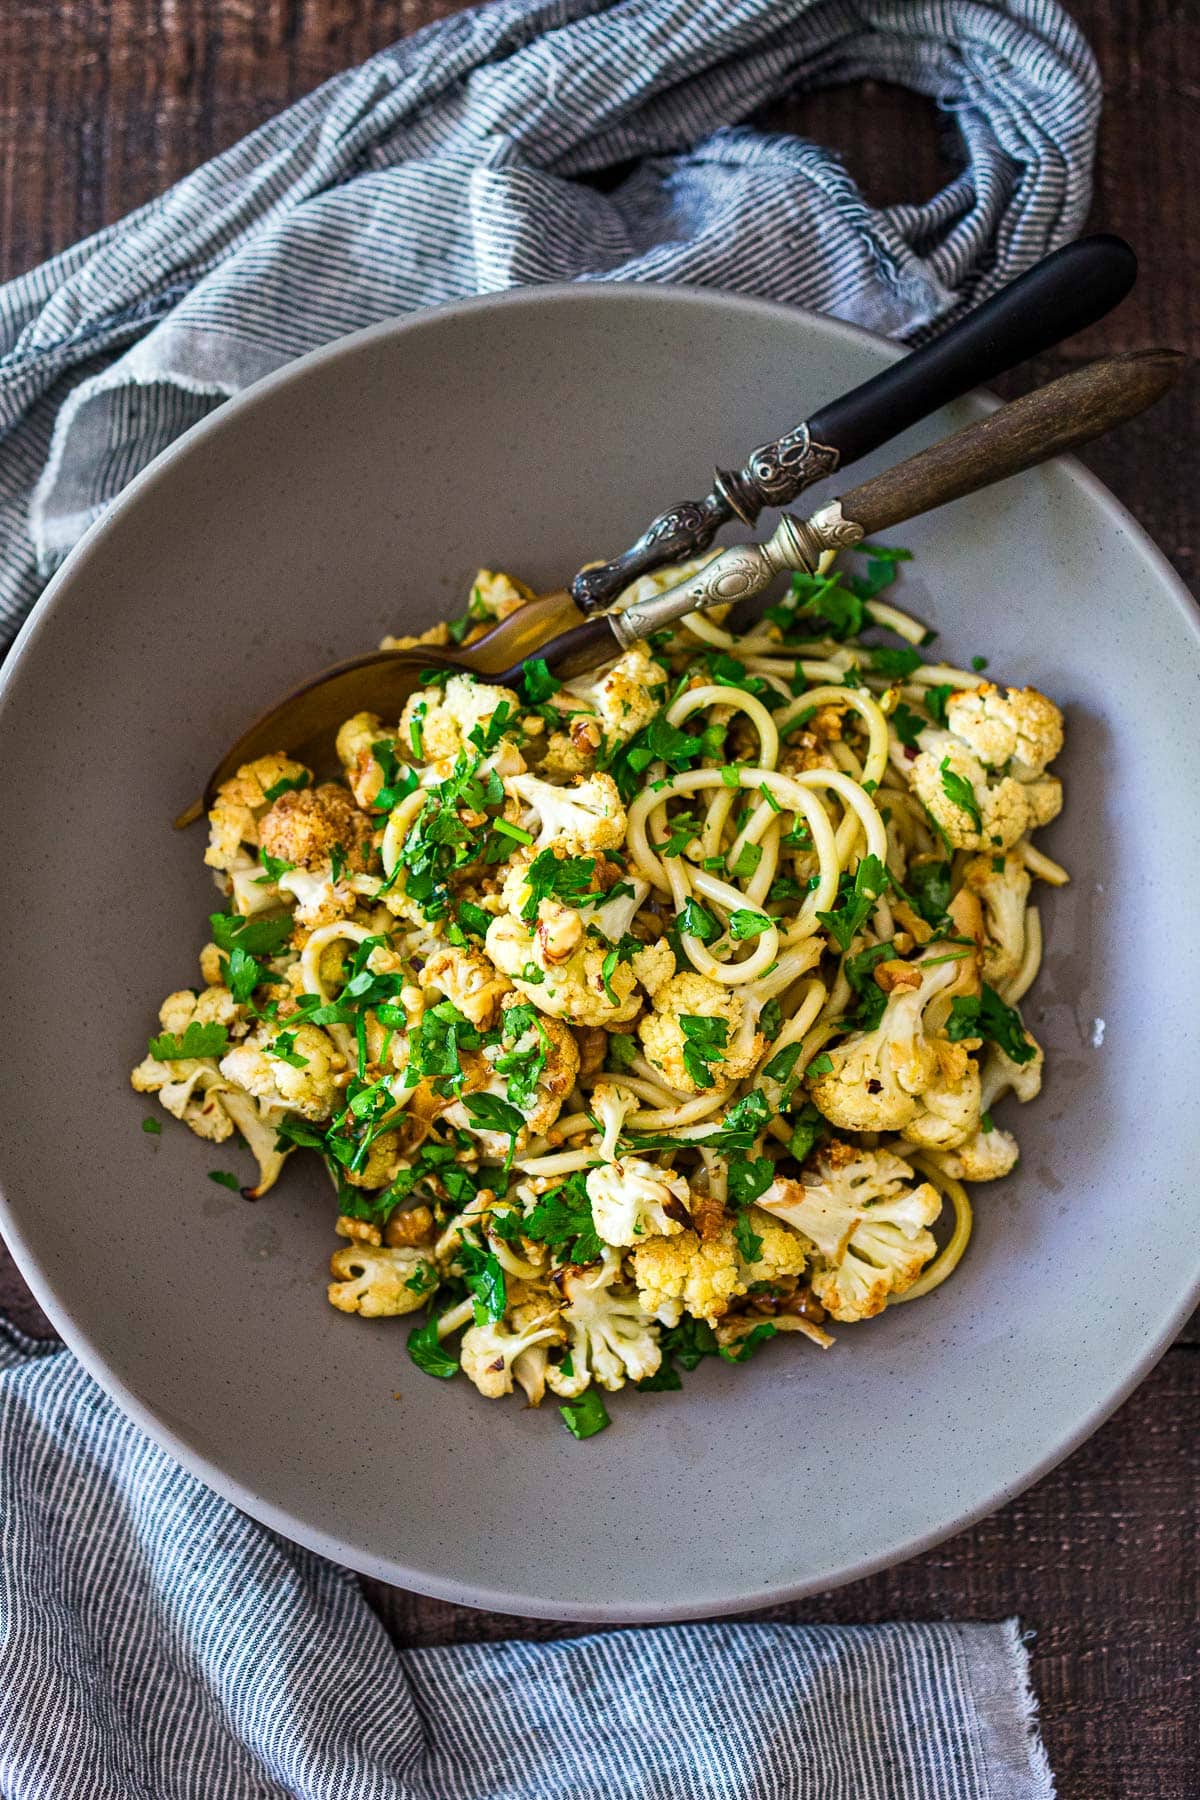 This roasted Cauliflower Pasta recipe is easy to make and completely delicious! It's made with toasted walnuts, garlic, fresh herbs and lemon zest. Video.